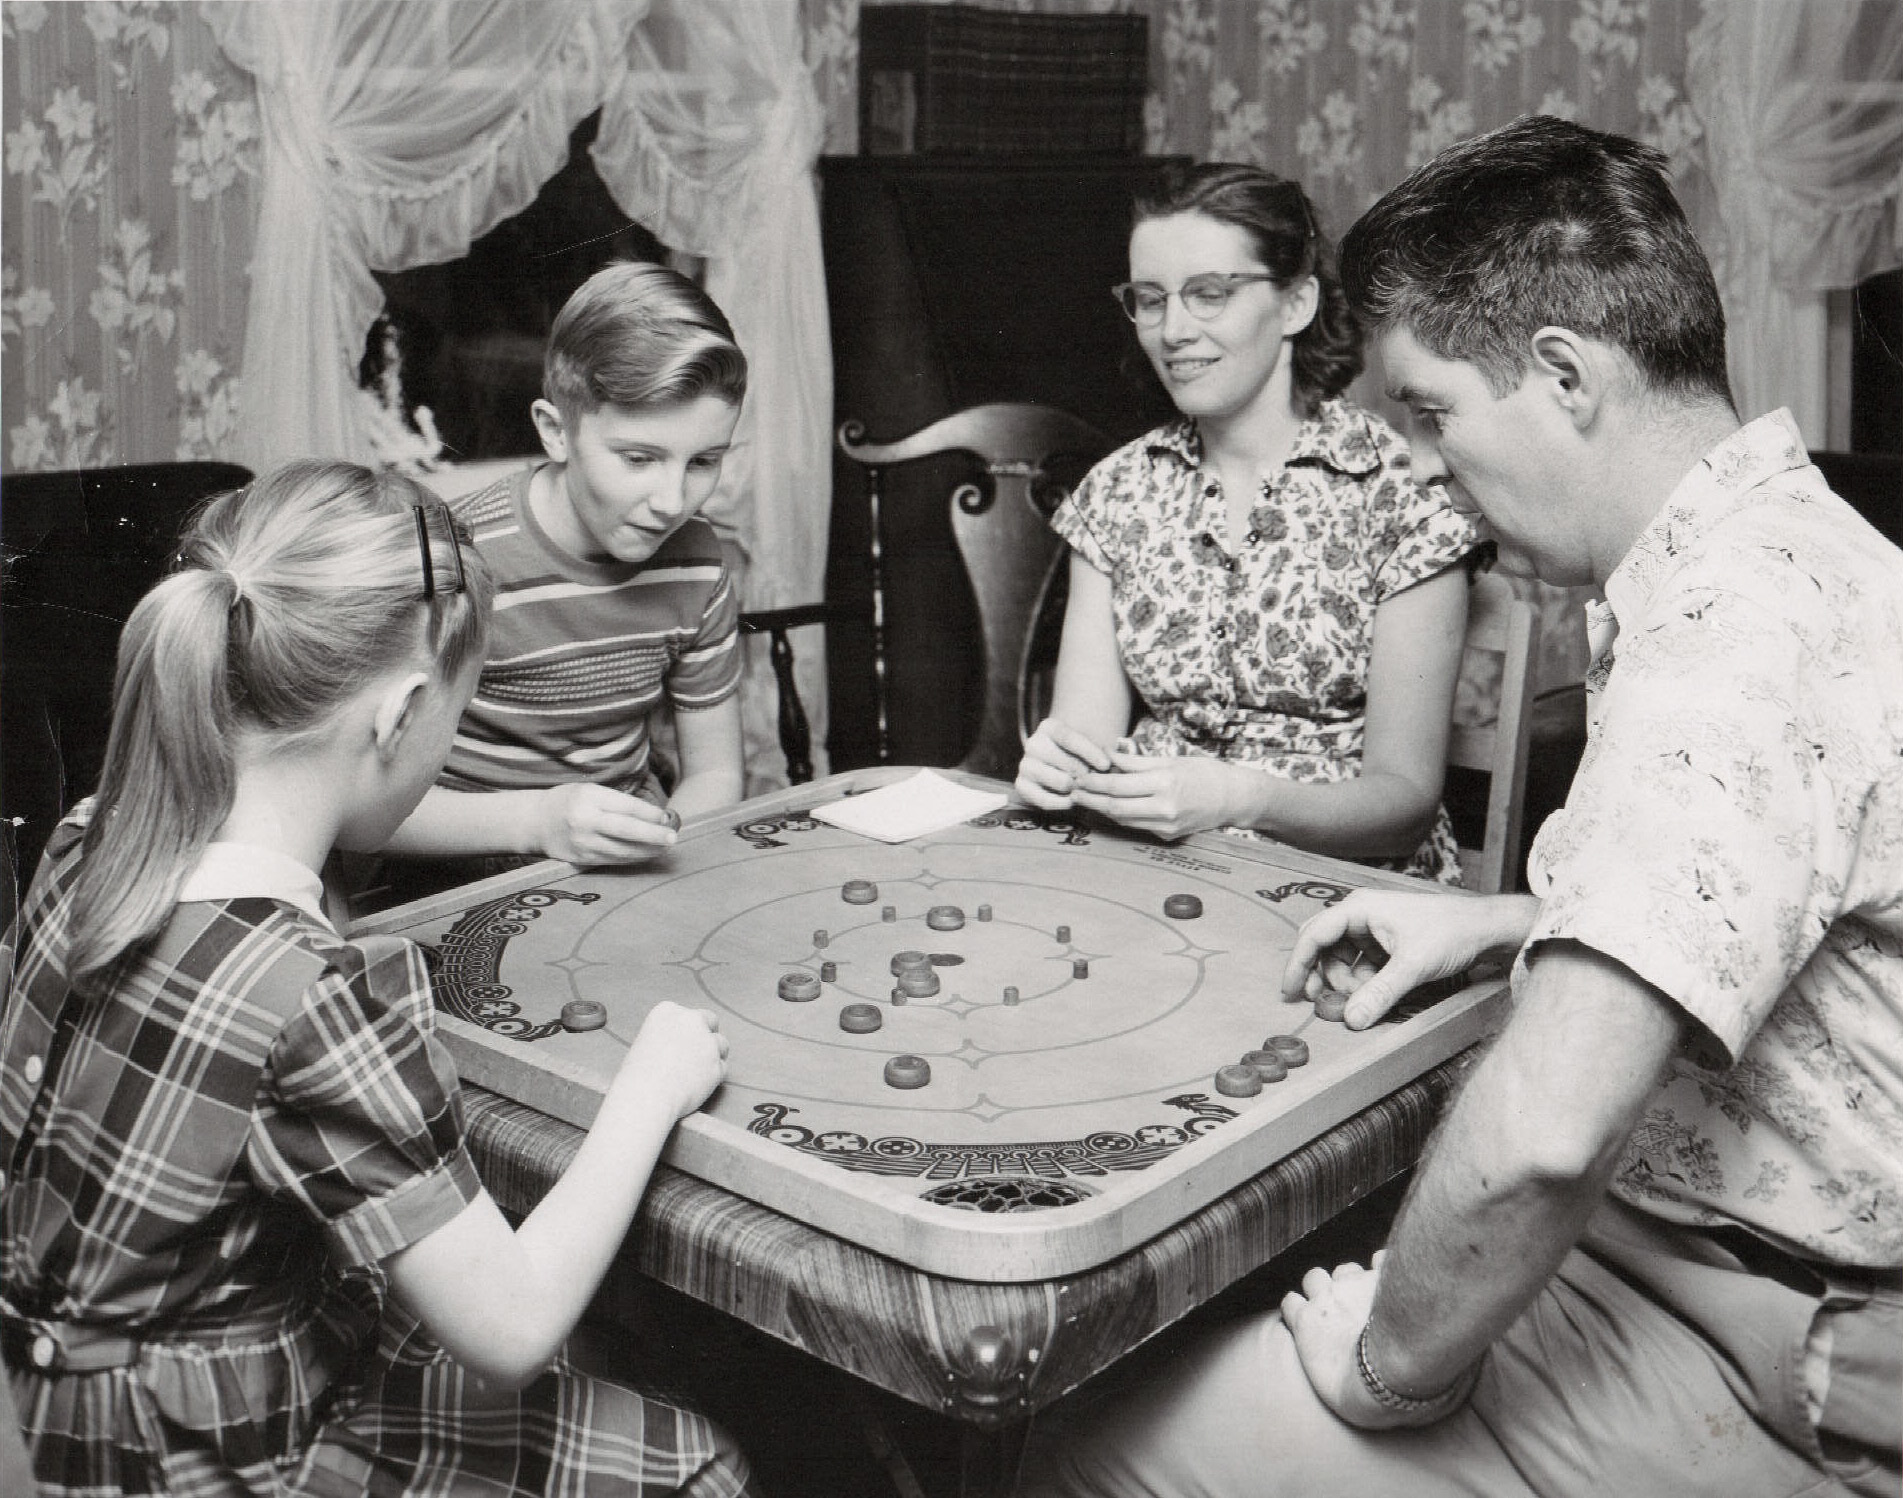 There was a time when people stayed at home and played board games with their family. This photo is from the archives of The Carrom Company that made this game, known as the "Carrom Game Board" or just "Carroms". Many versions of this game were made over the last 100 years in the Ludington, MI, factory, which is still in business. 

This is a Model K board made between 1939-1941. A rulebook that came with all the boards was filled with dozens of different games that could be played on both sides of the board. 

This photo was used for promotional purposes and I would guess it is from the mid to late 1940s. (My family owns The Carrom Company today.) View full size.